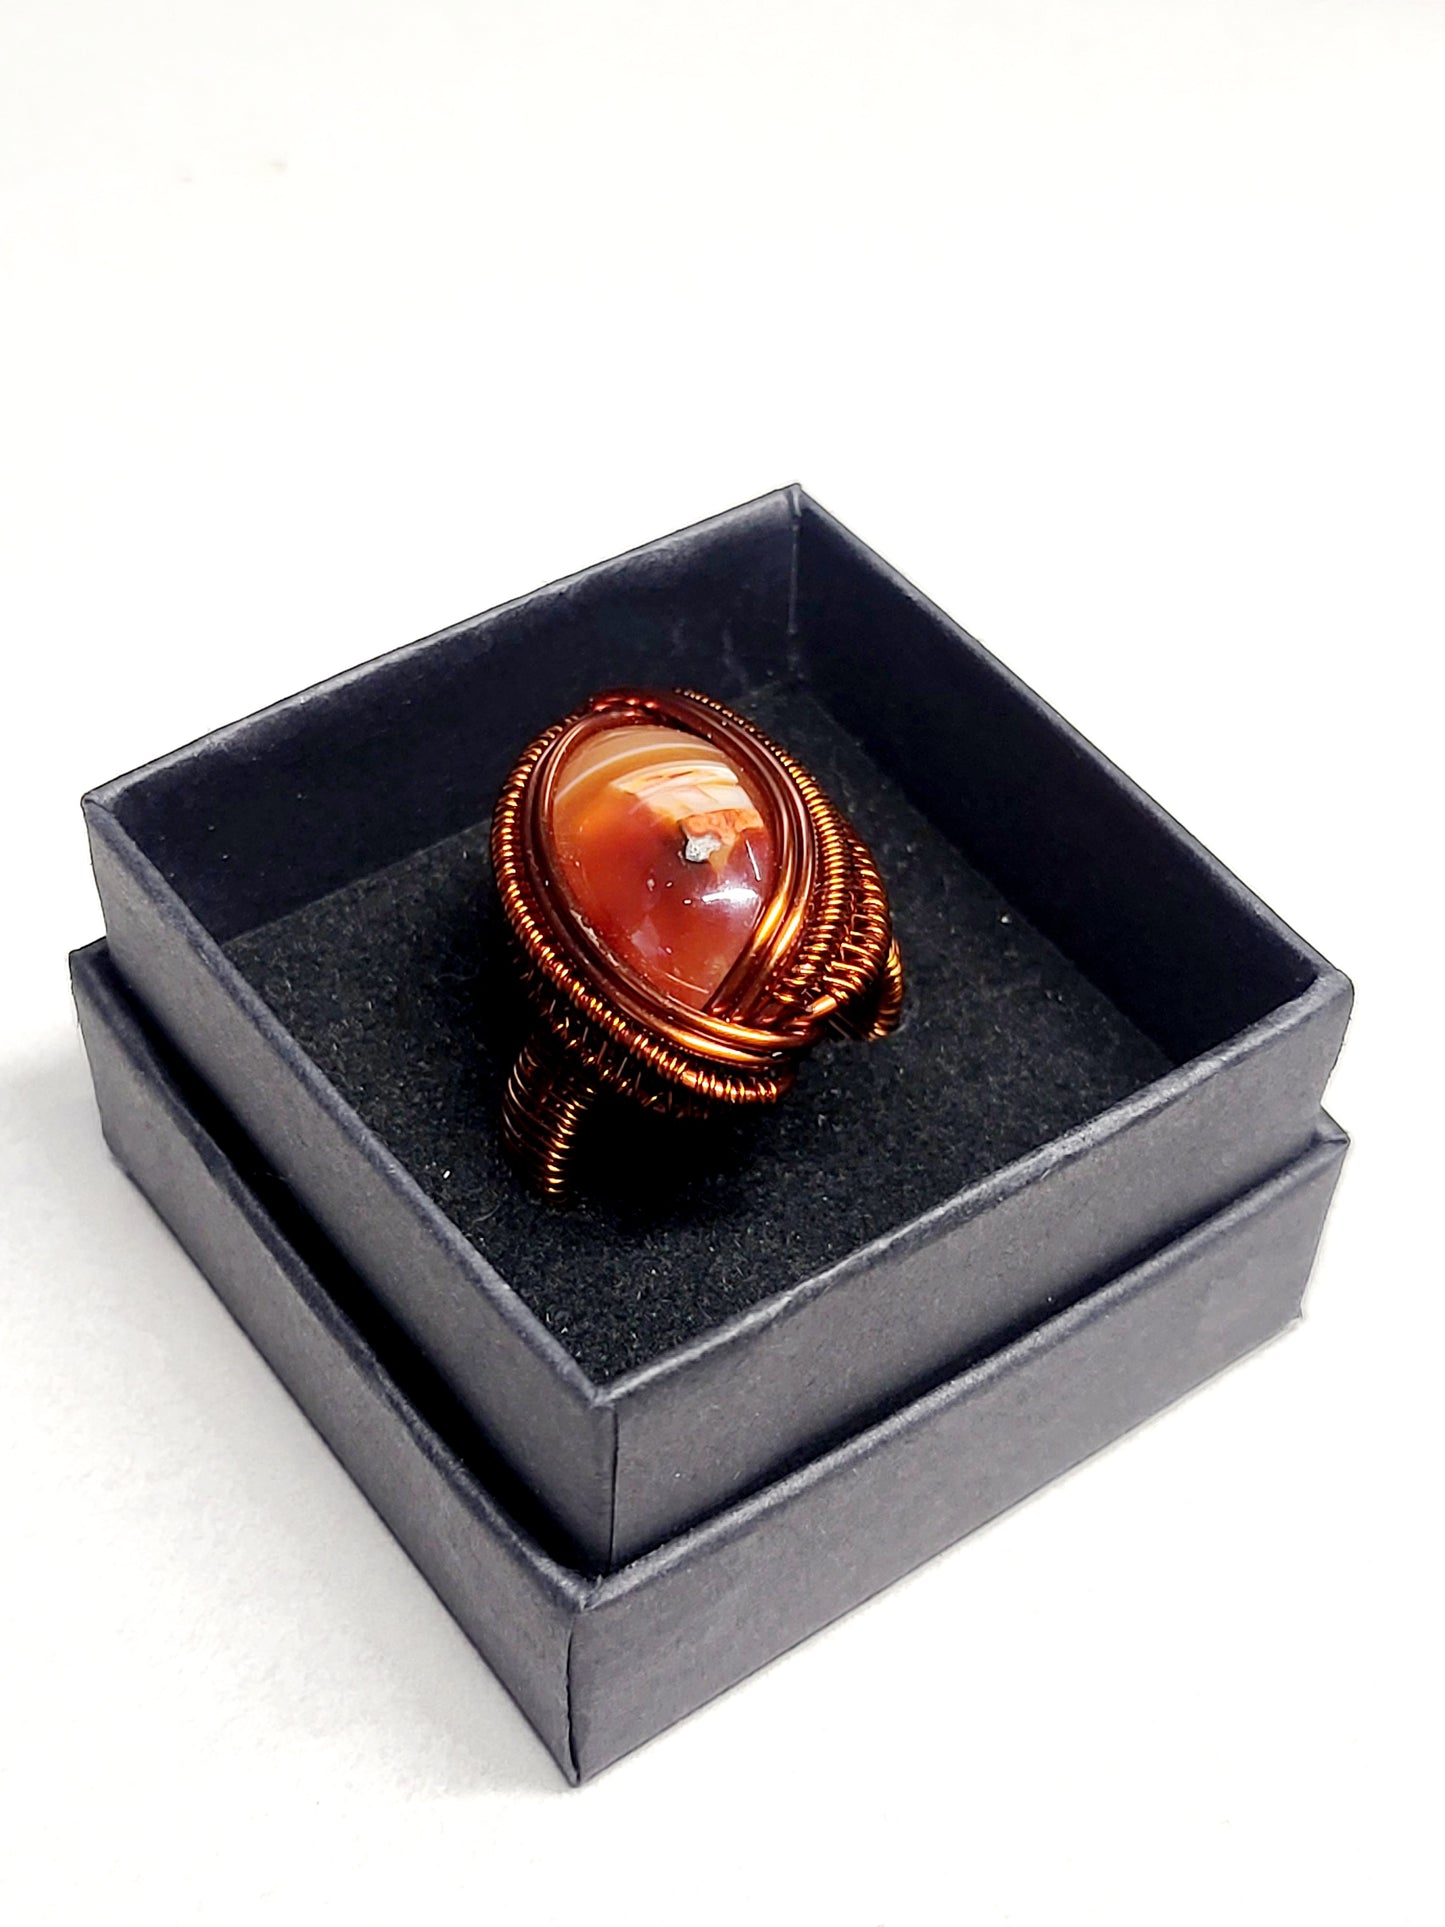 Carnelian and Copper Wire Wrapped Ring Size 10